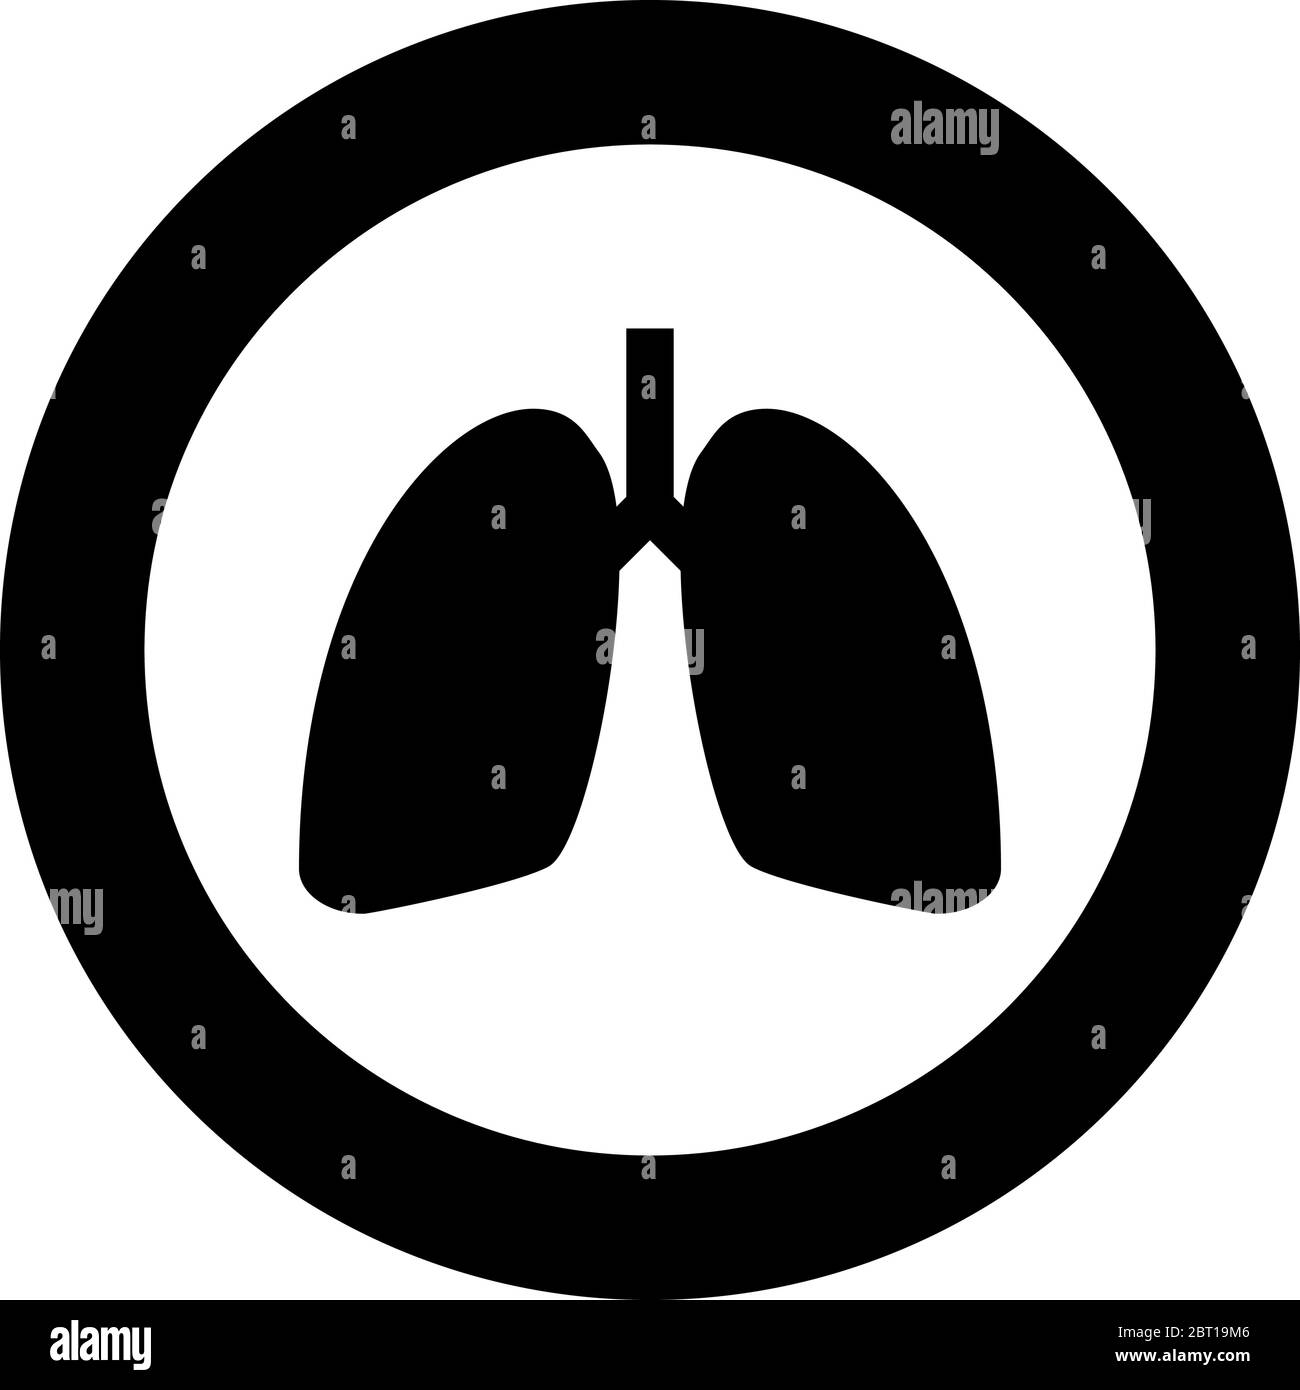 Lungs human icon in circle round black color vector illustration flat style simple image Stock Vector